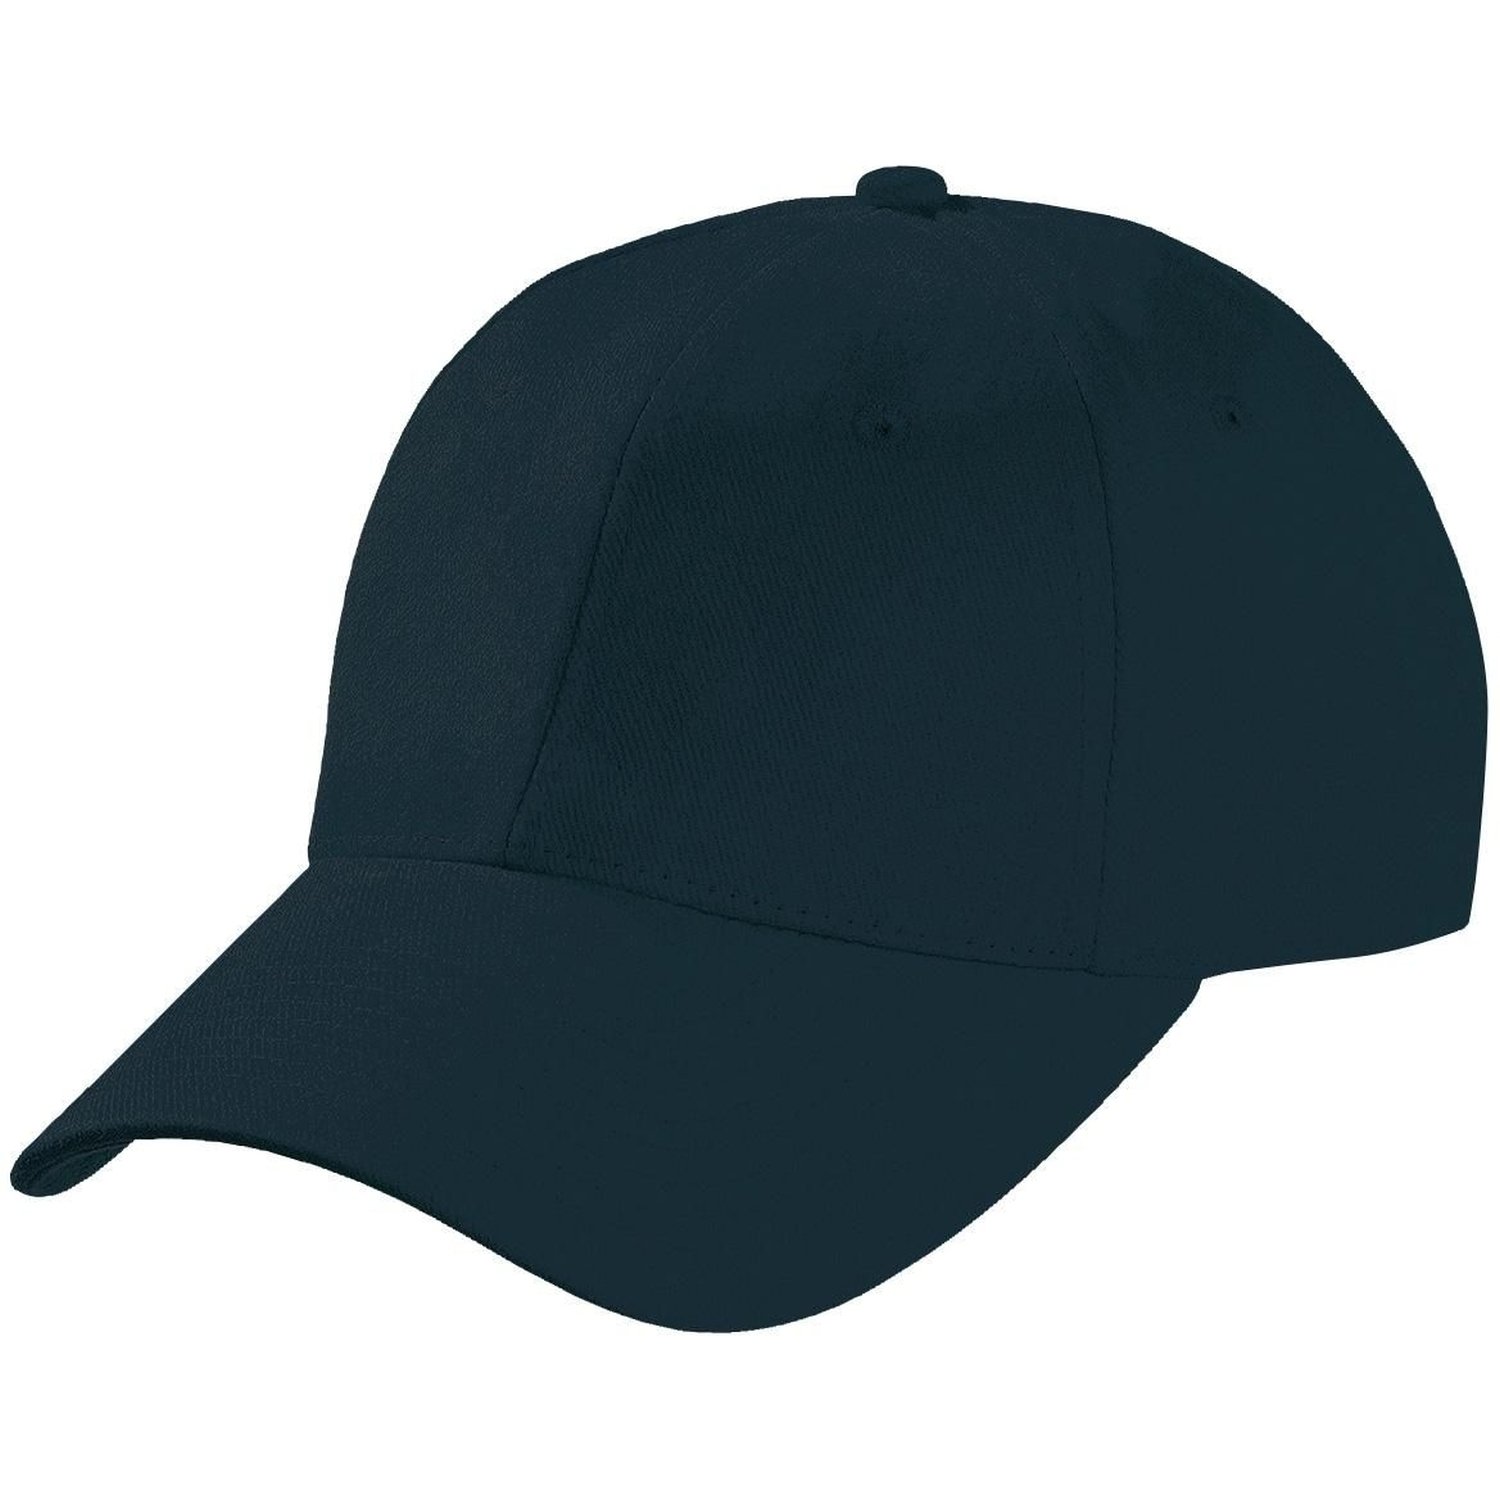 Heavy Brushed Cotton 6 Panel Cap With Buckle